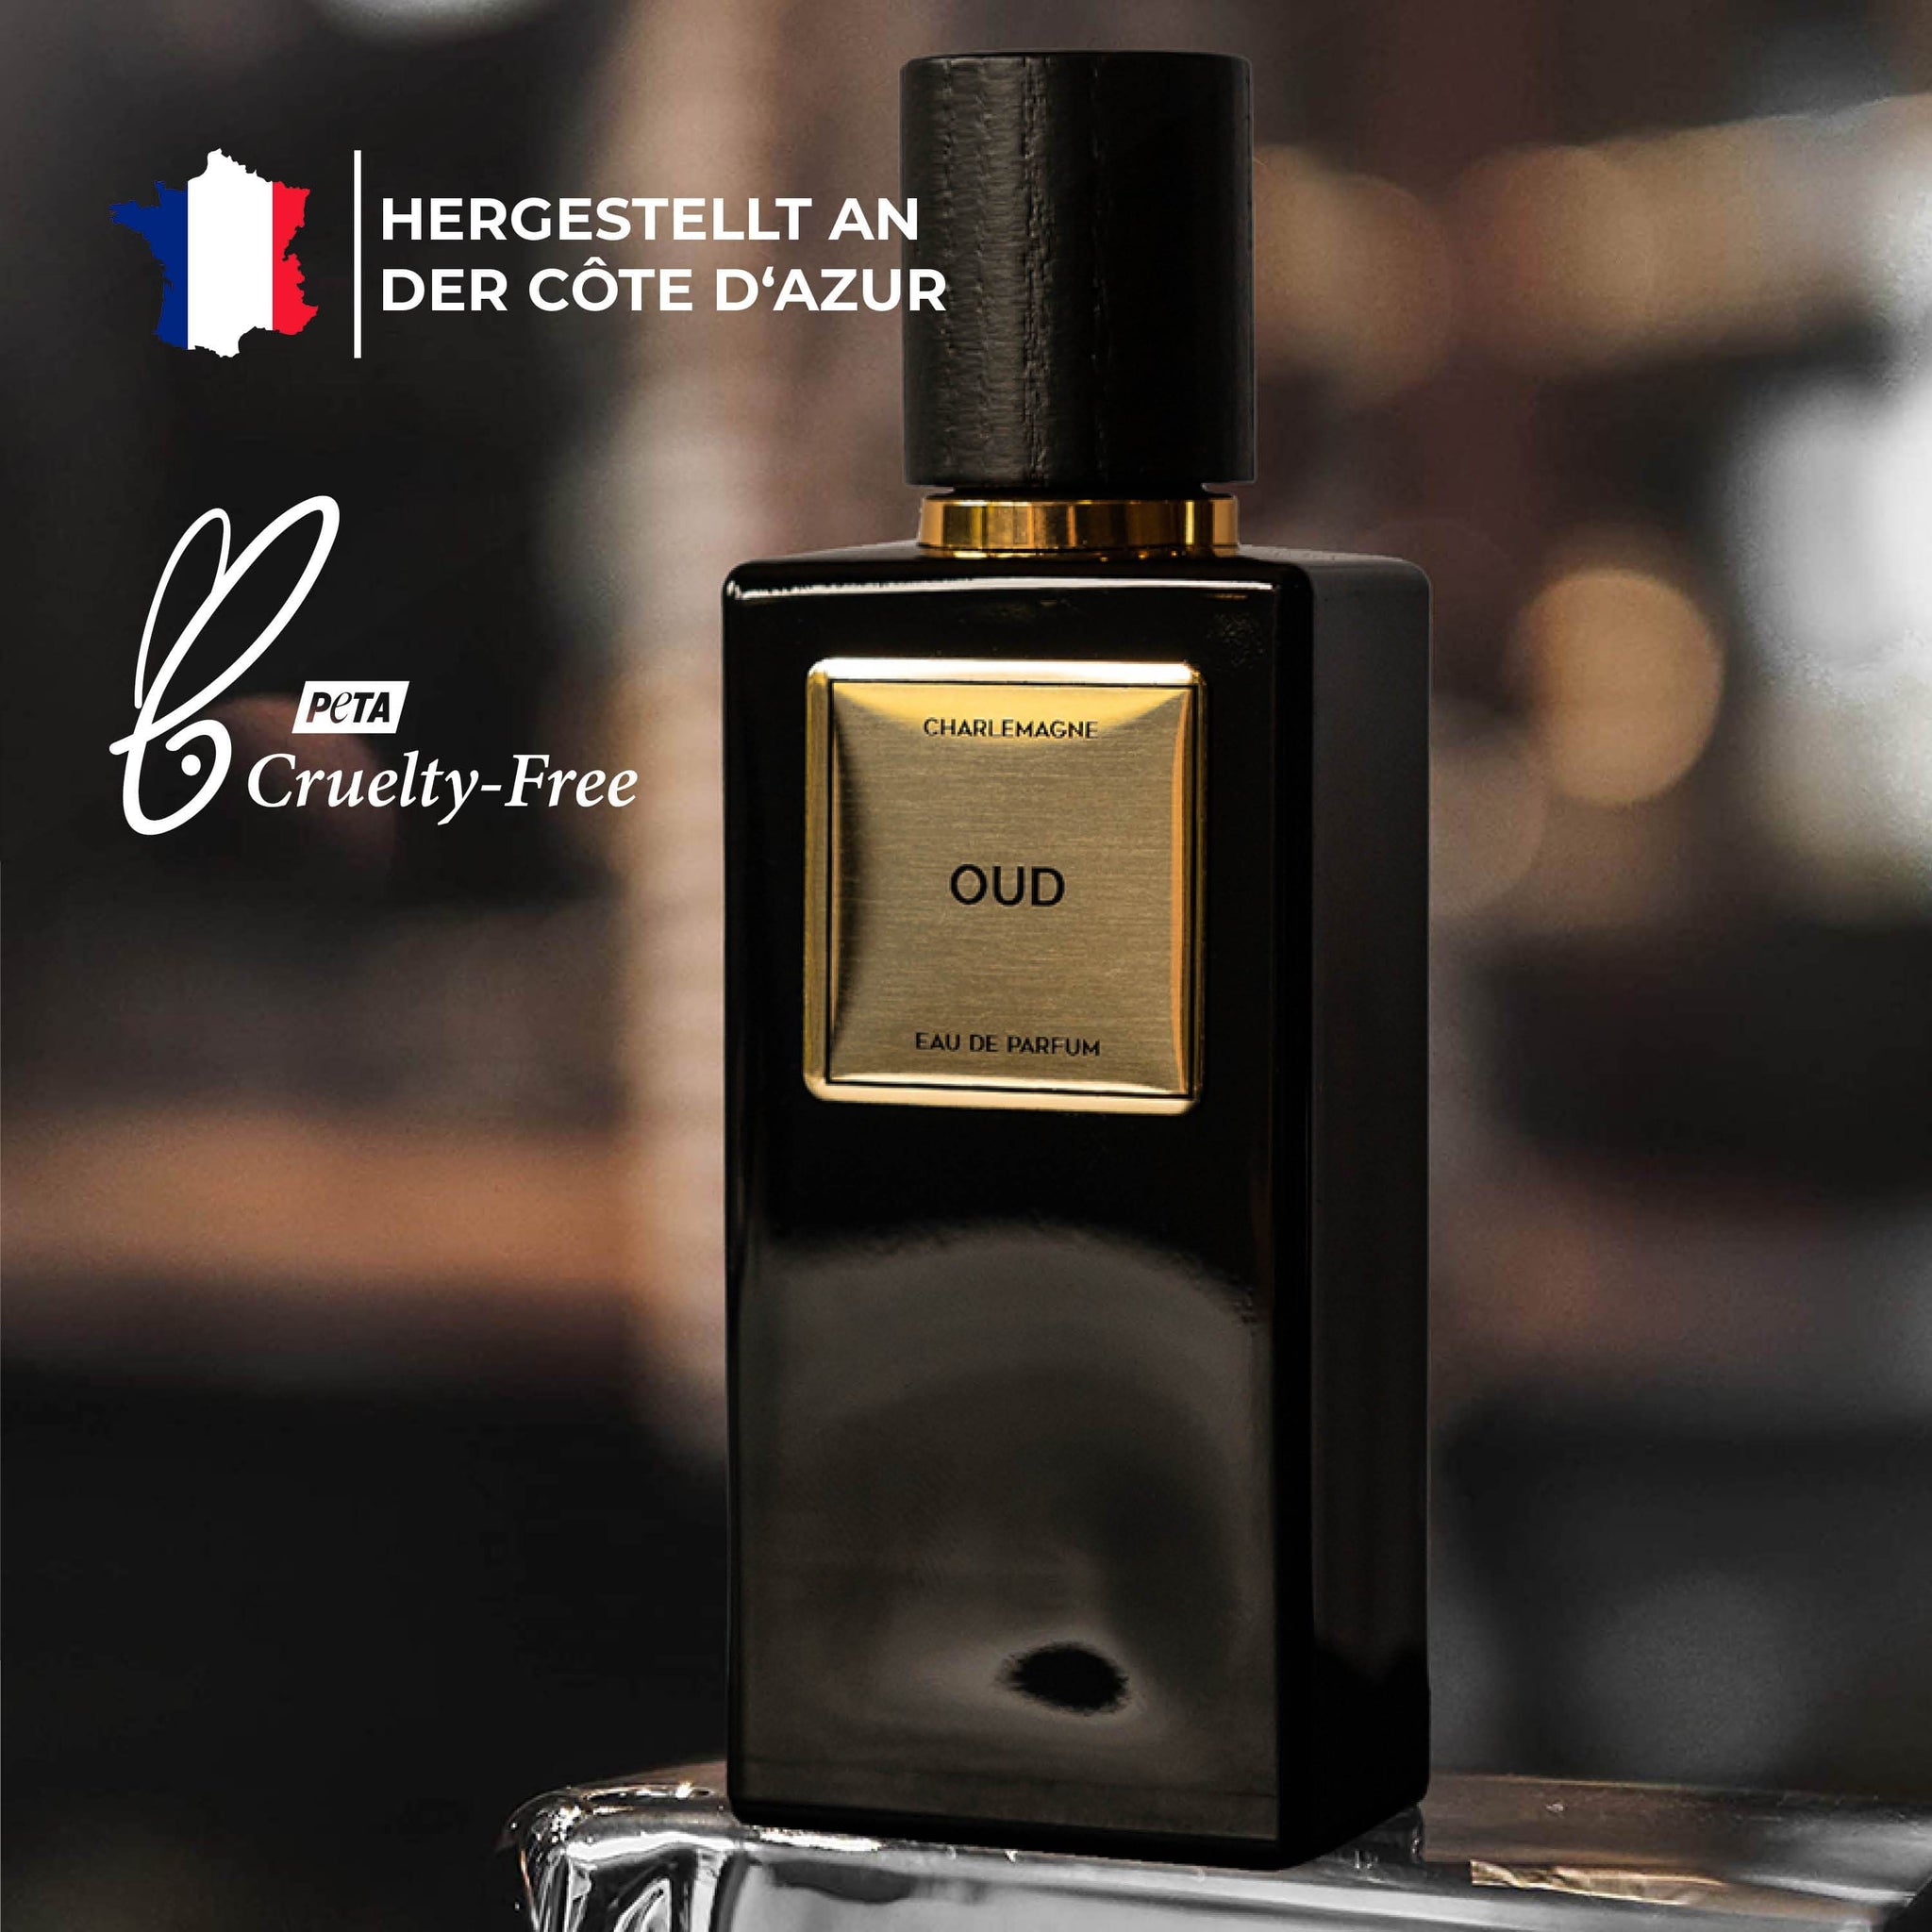 Charlemagne Oud - • Charlemagne • Barbers Premium de Created Eau By Parfum